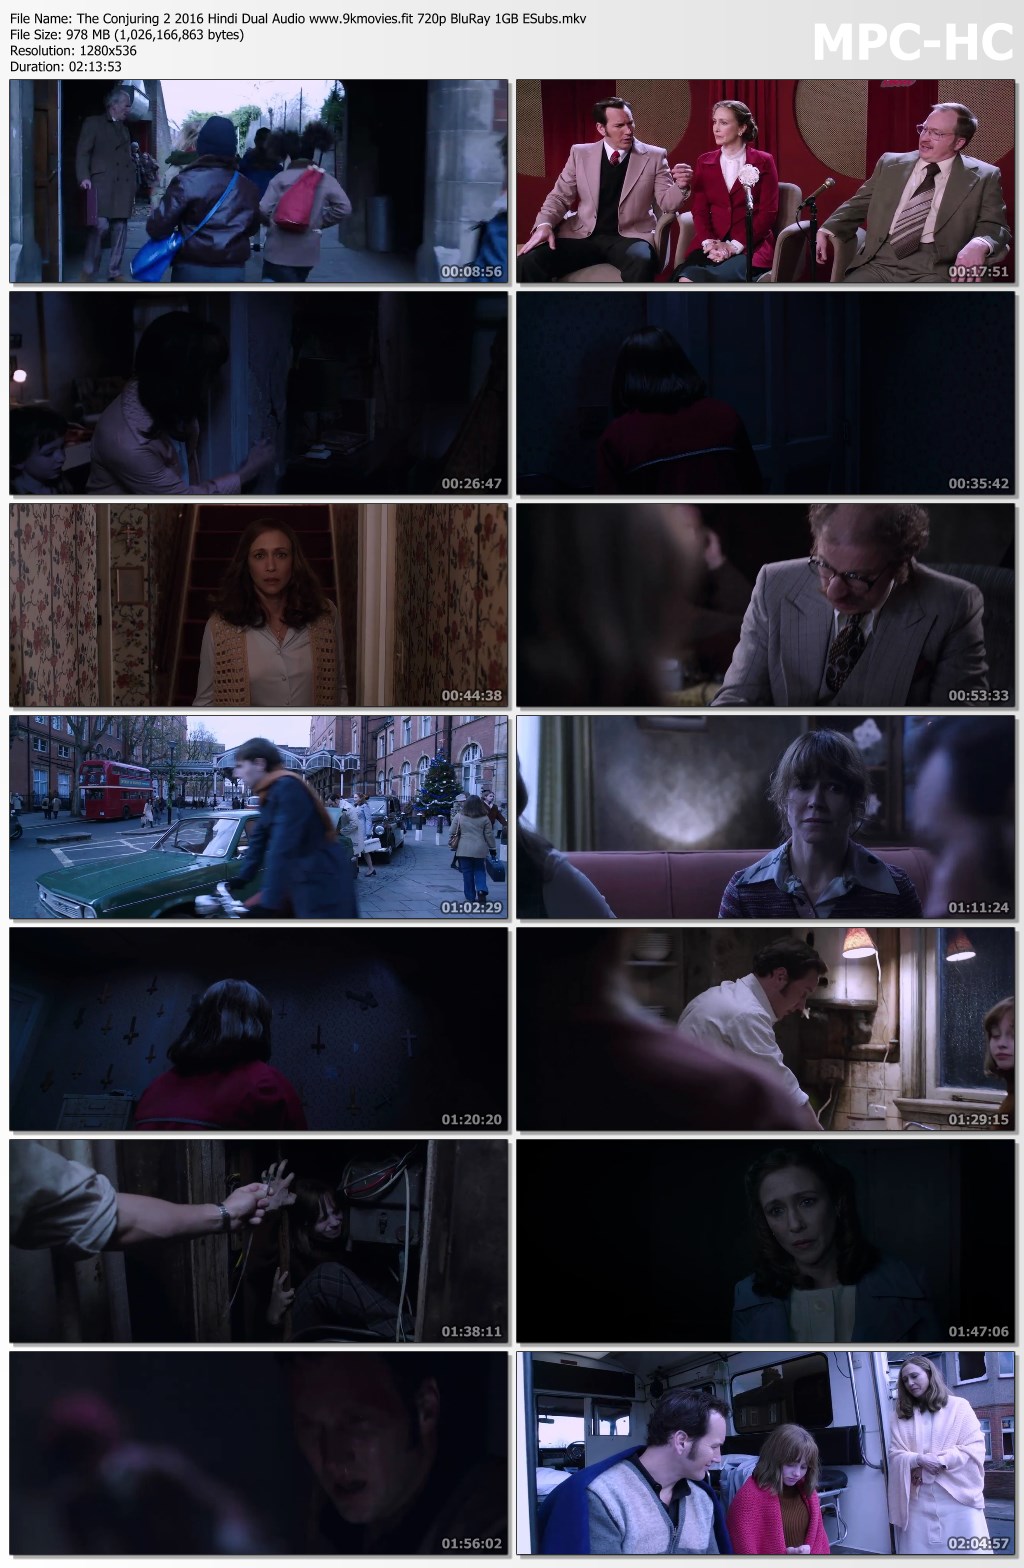 the conjuring 2 full movie hd download in hindi